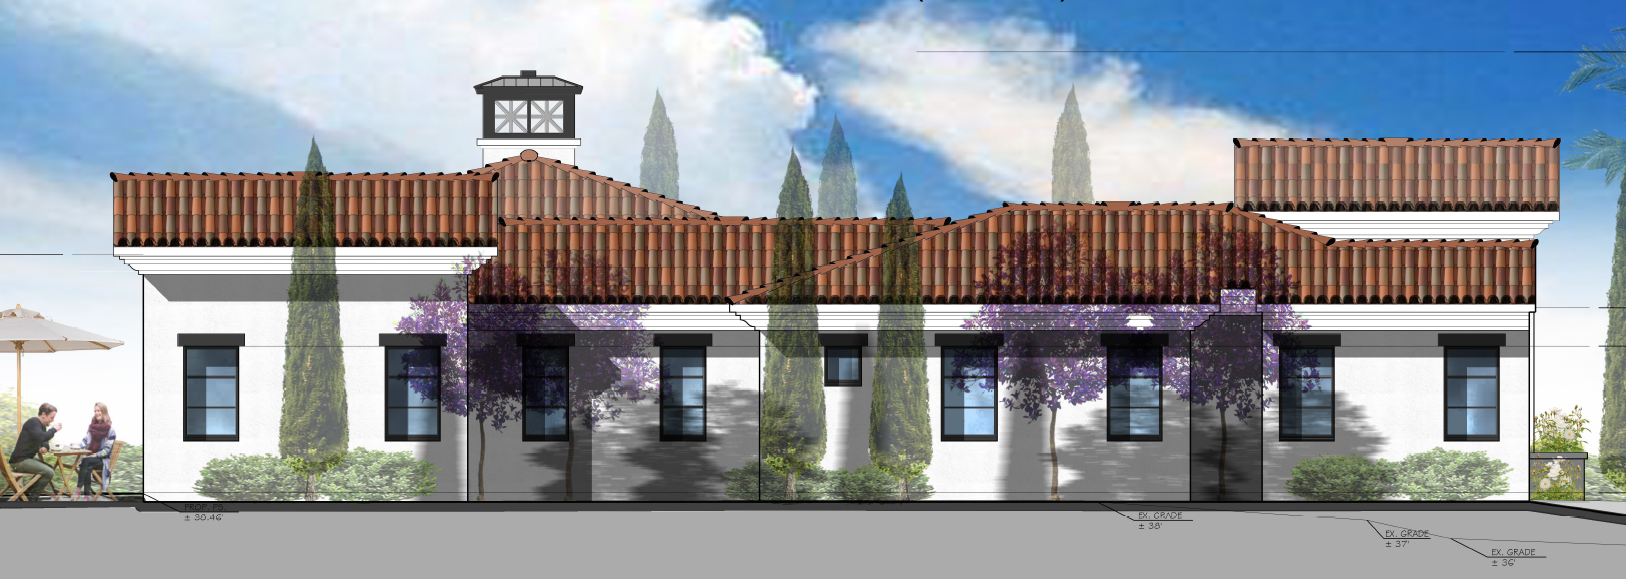 02-yng-architects-on-the-boards-la-quinta-lot-23-south-elevation.png